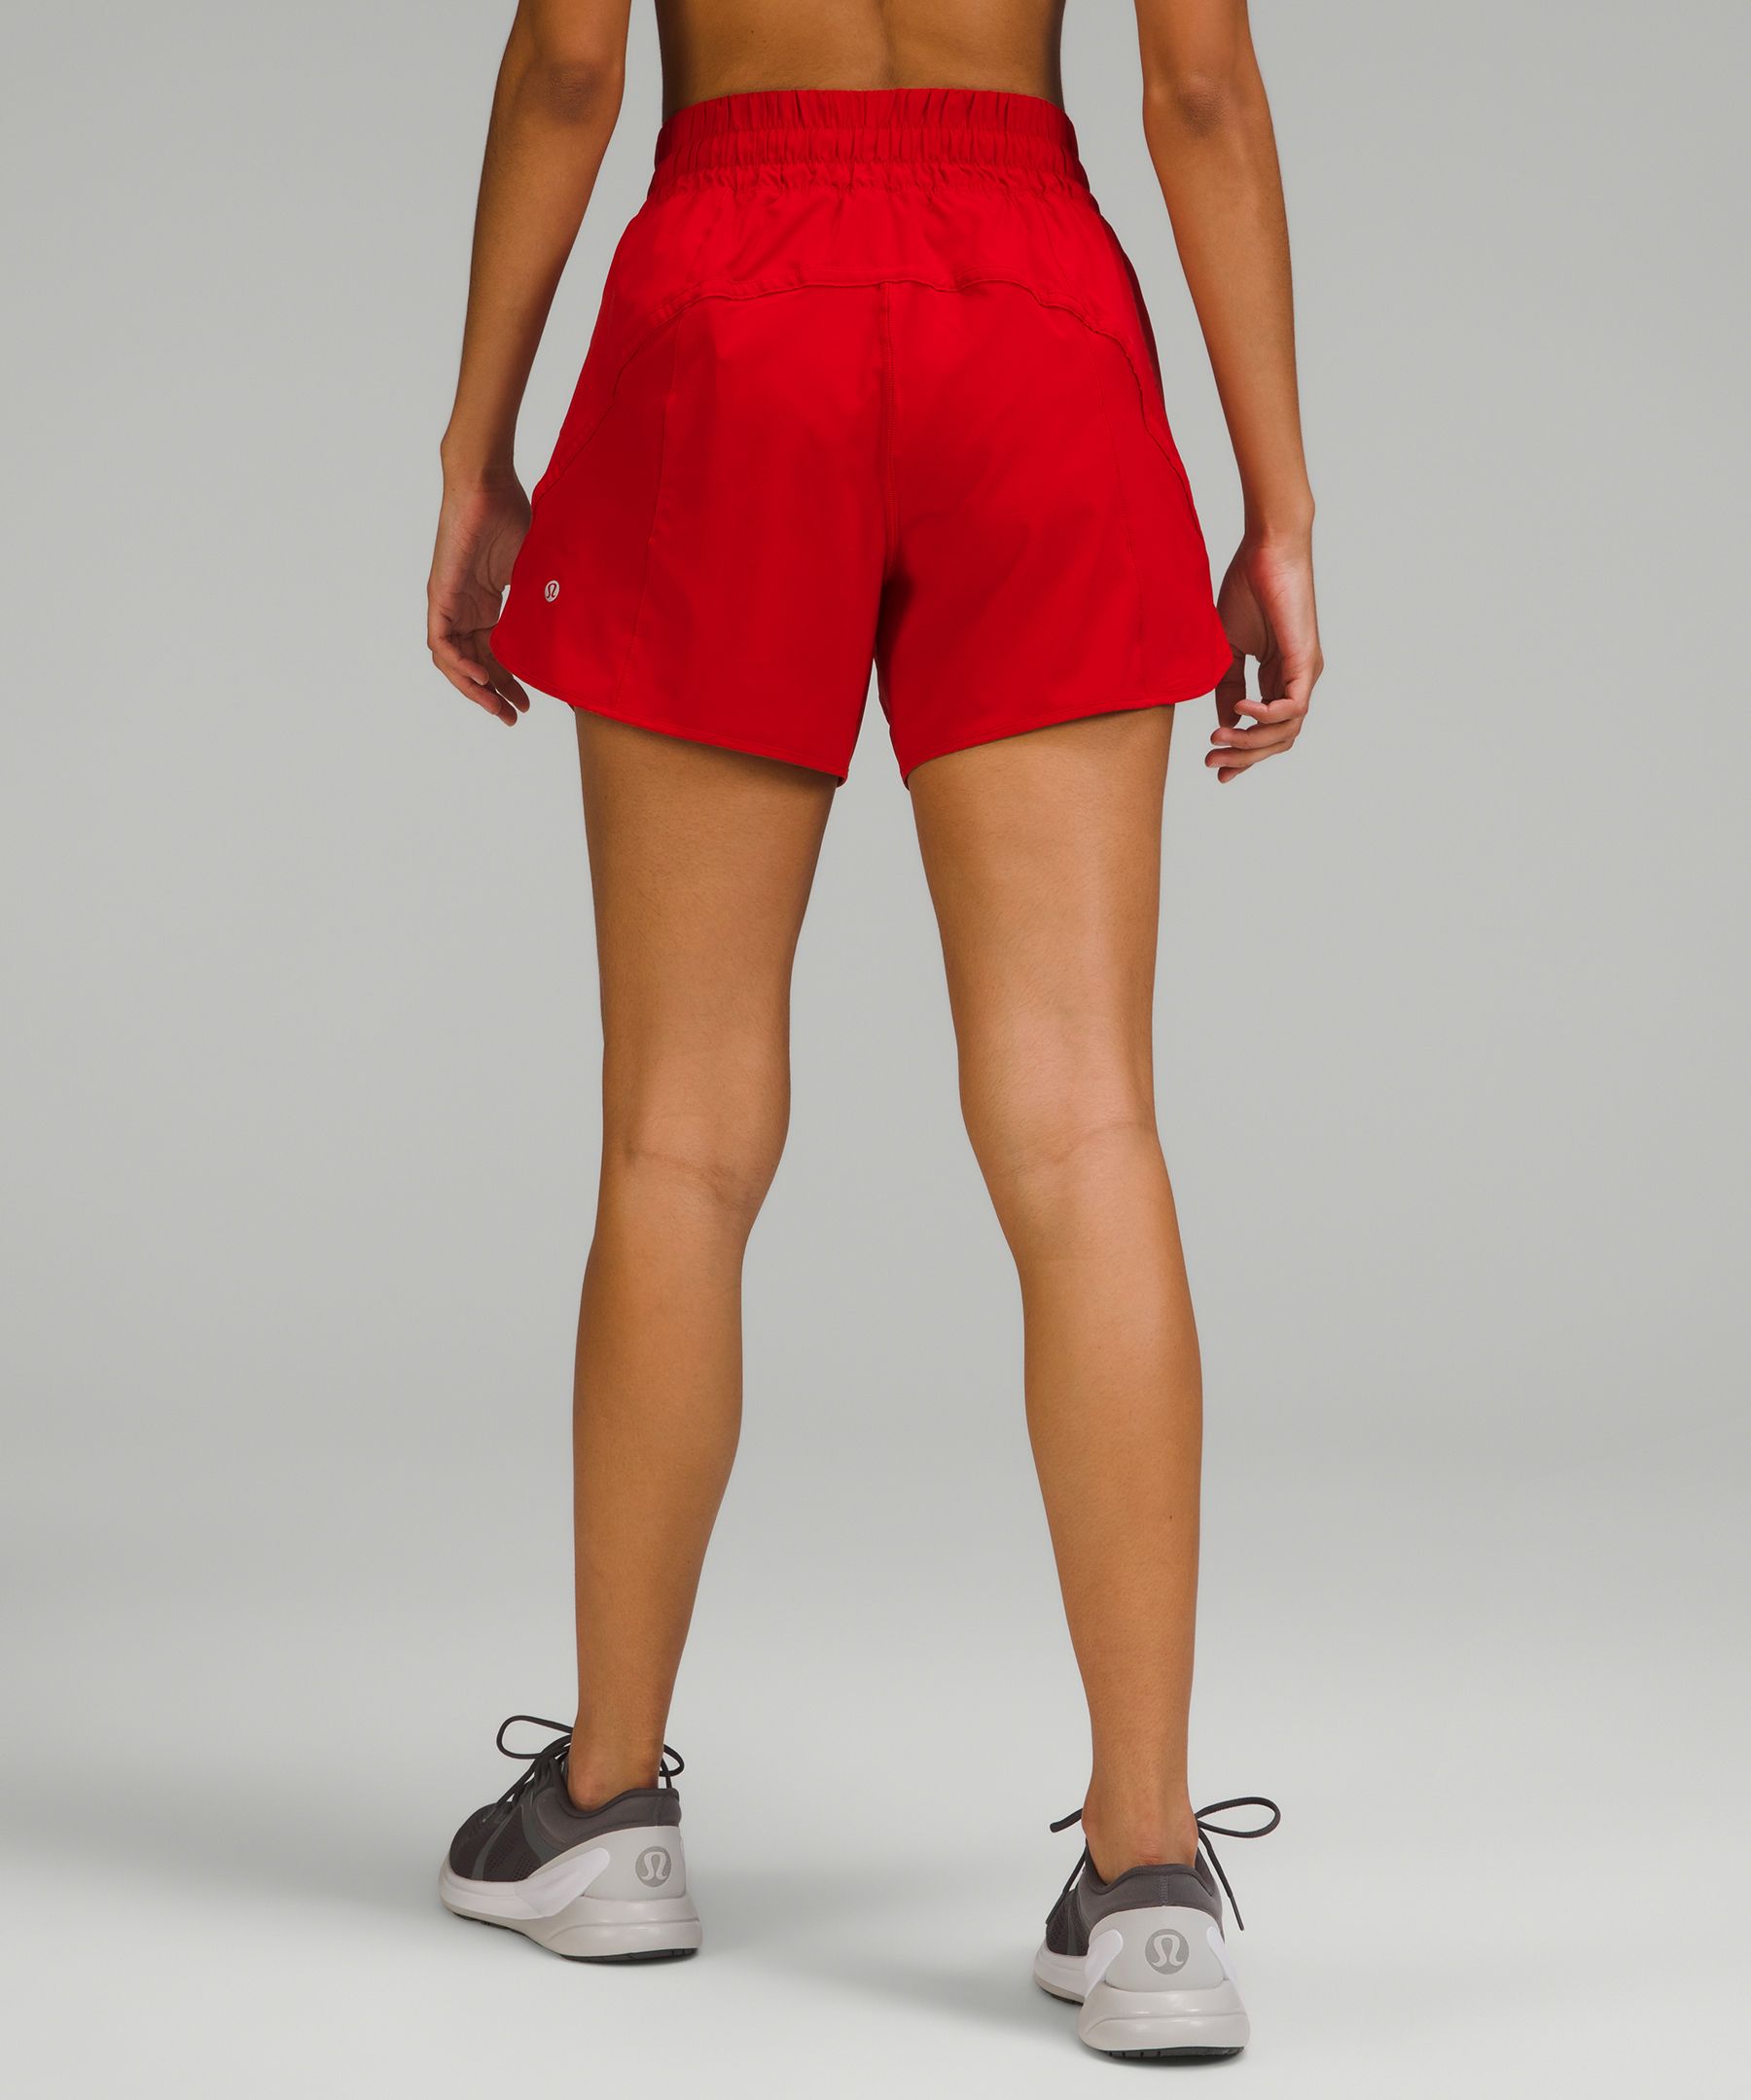 Track That High-Rise Lined Short 5, Women's Shorts